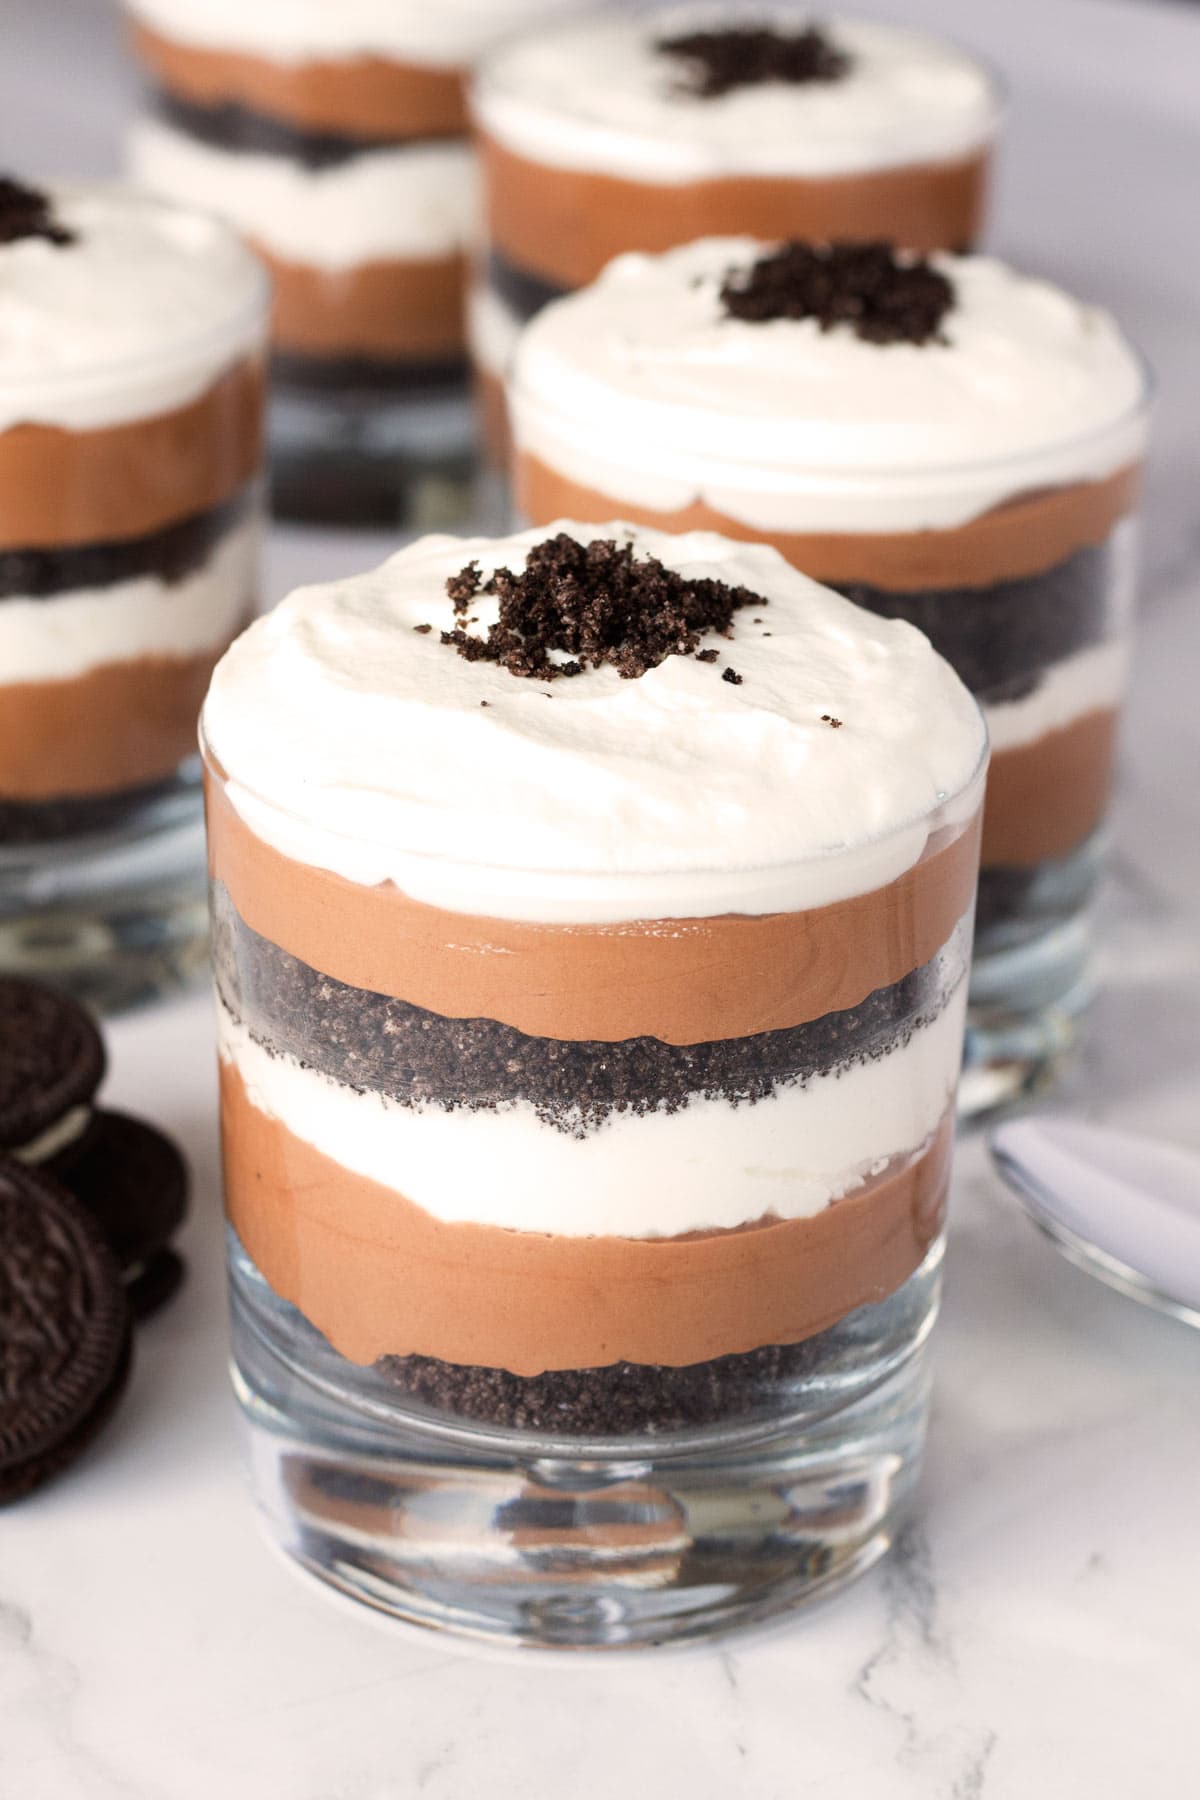 Oreo Cookies next to parfaits filled with chocolate mousse.